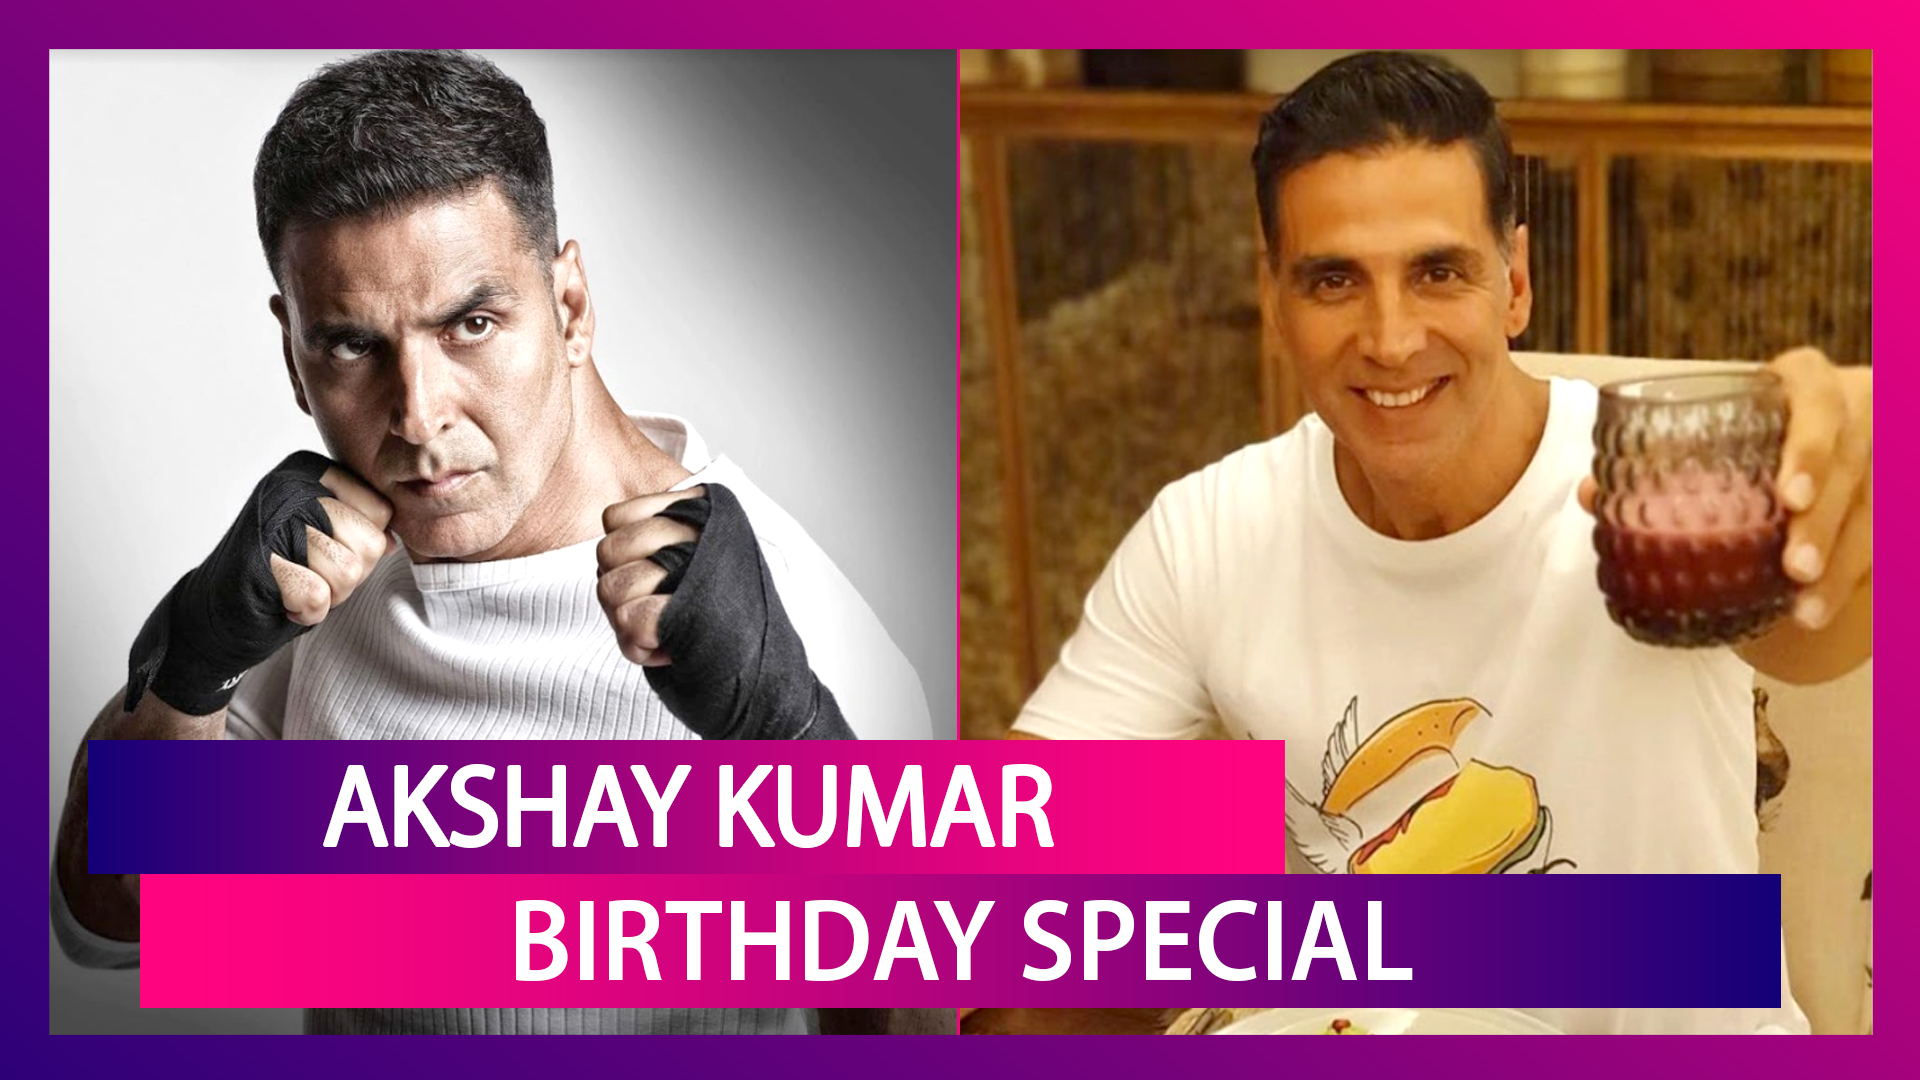 Akshay Kumar Birthday Special: Workout And Diet That Keep The Bollywood Actor Fit